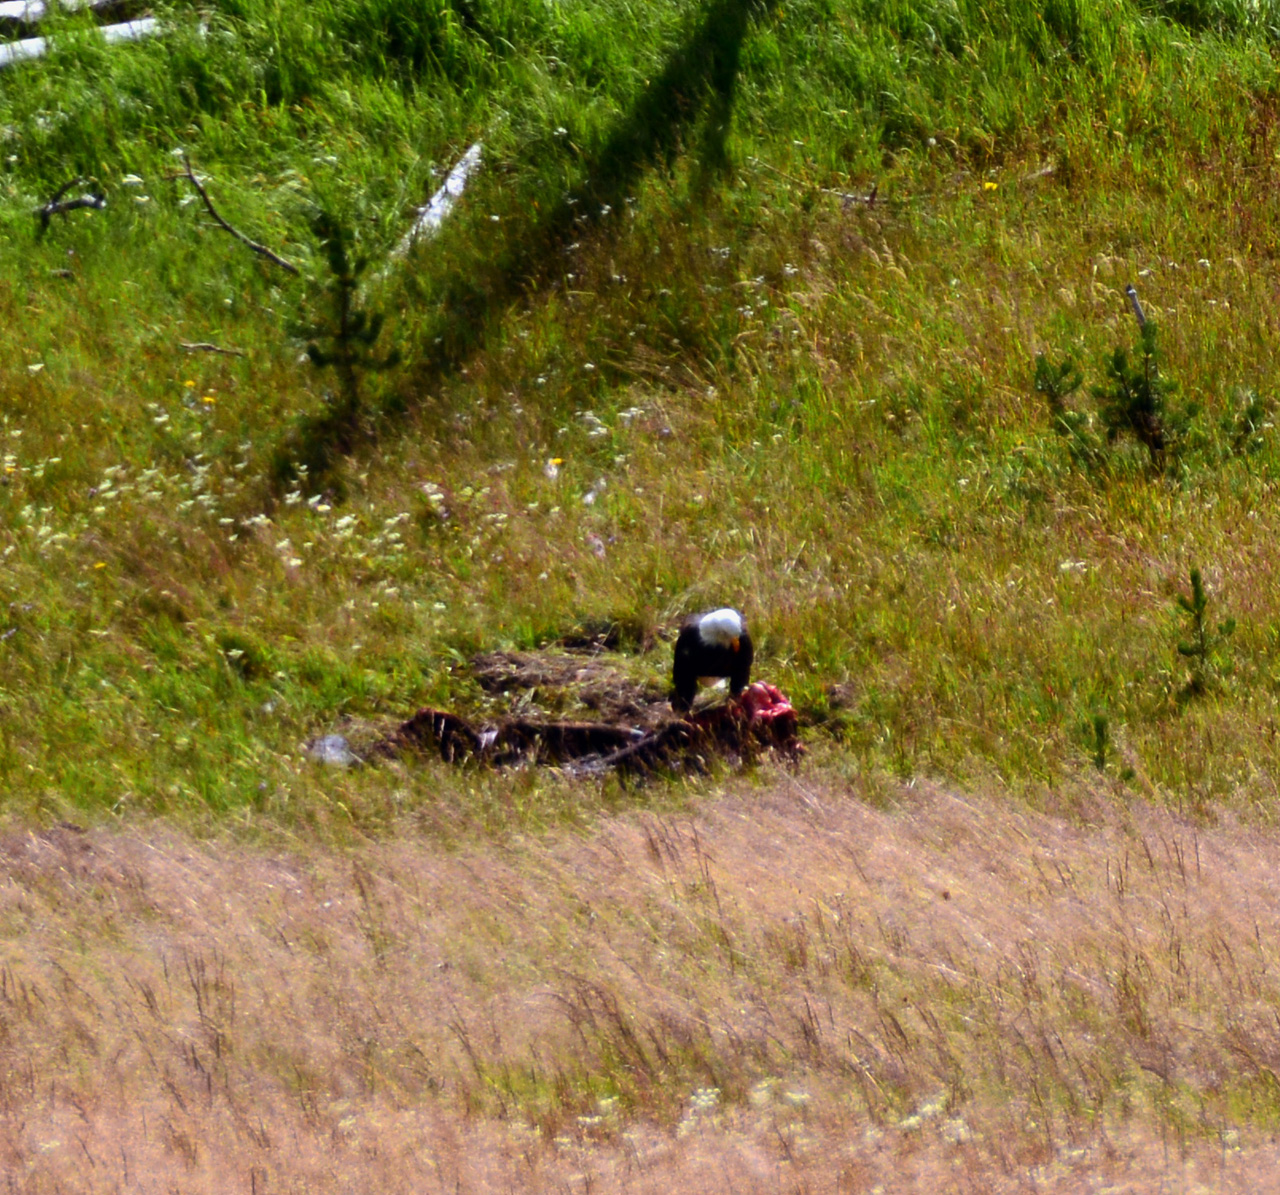 2015-07-26, 084, Yellowstone NP, WY, Eagle with Kill